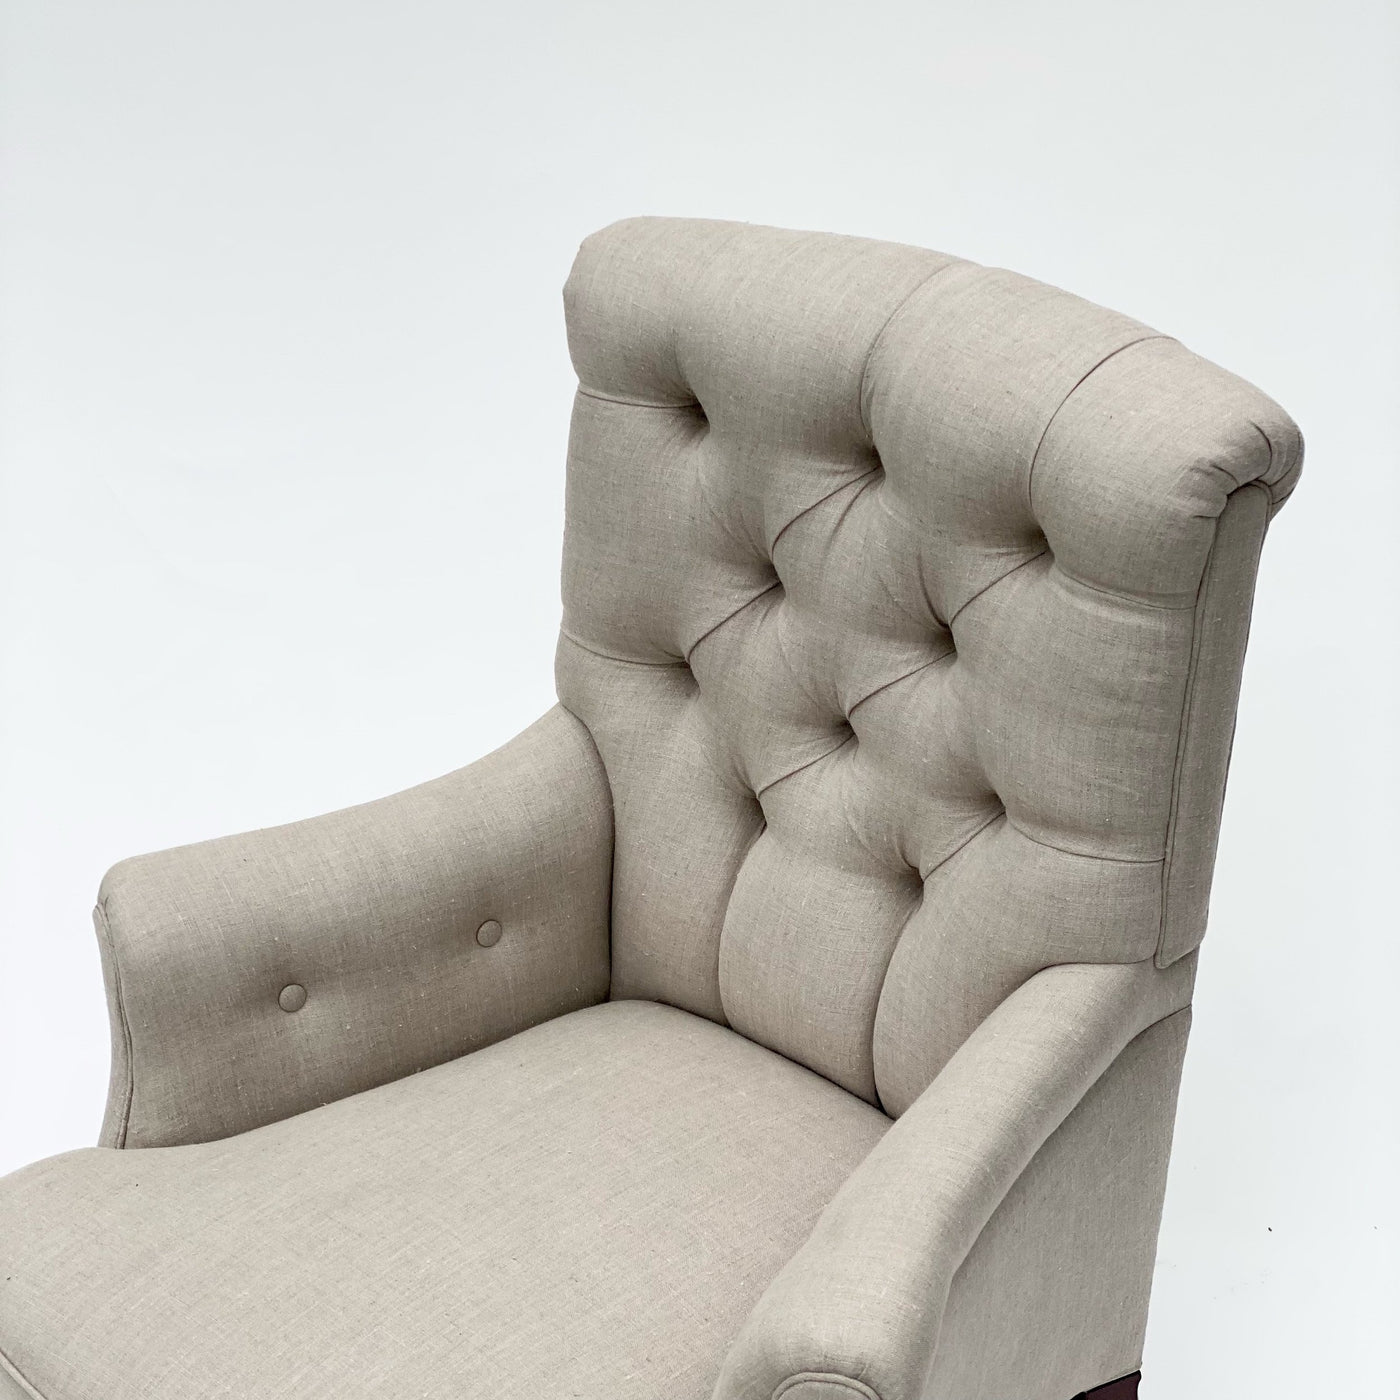 French Armchair W/ Linen Upholstery, Early 20Th C.